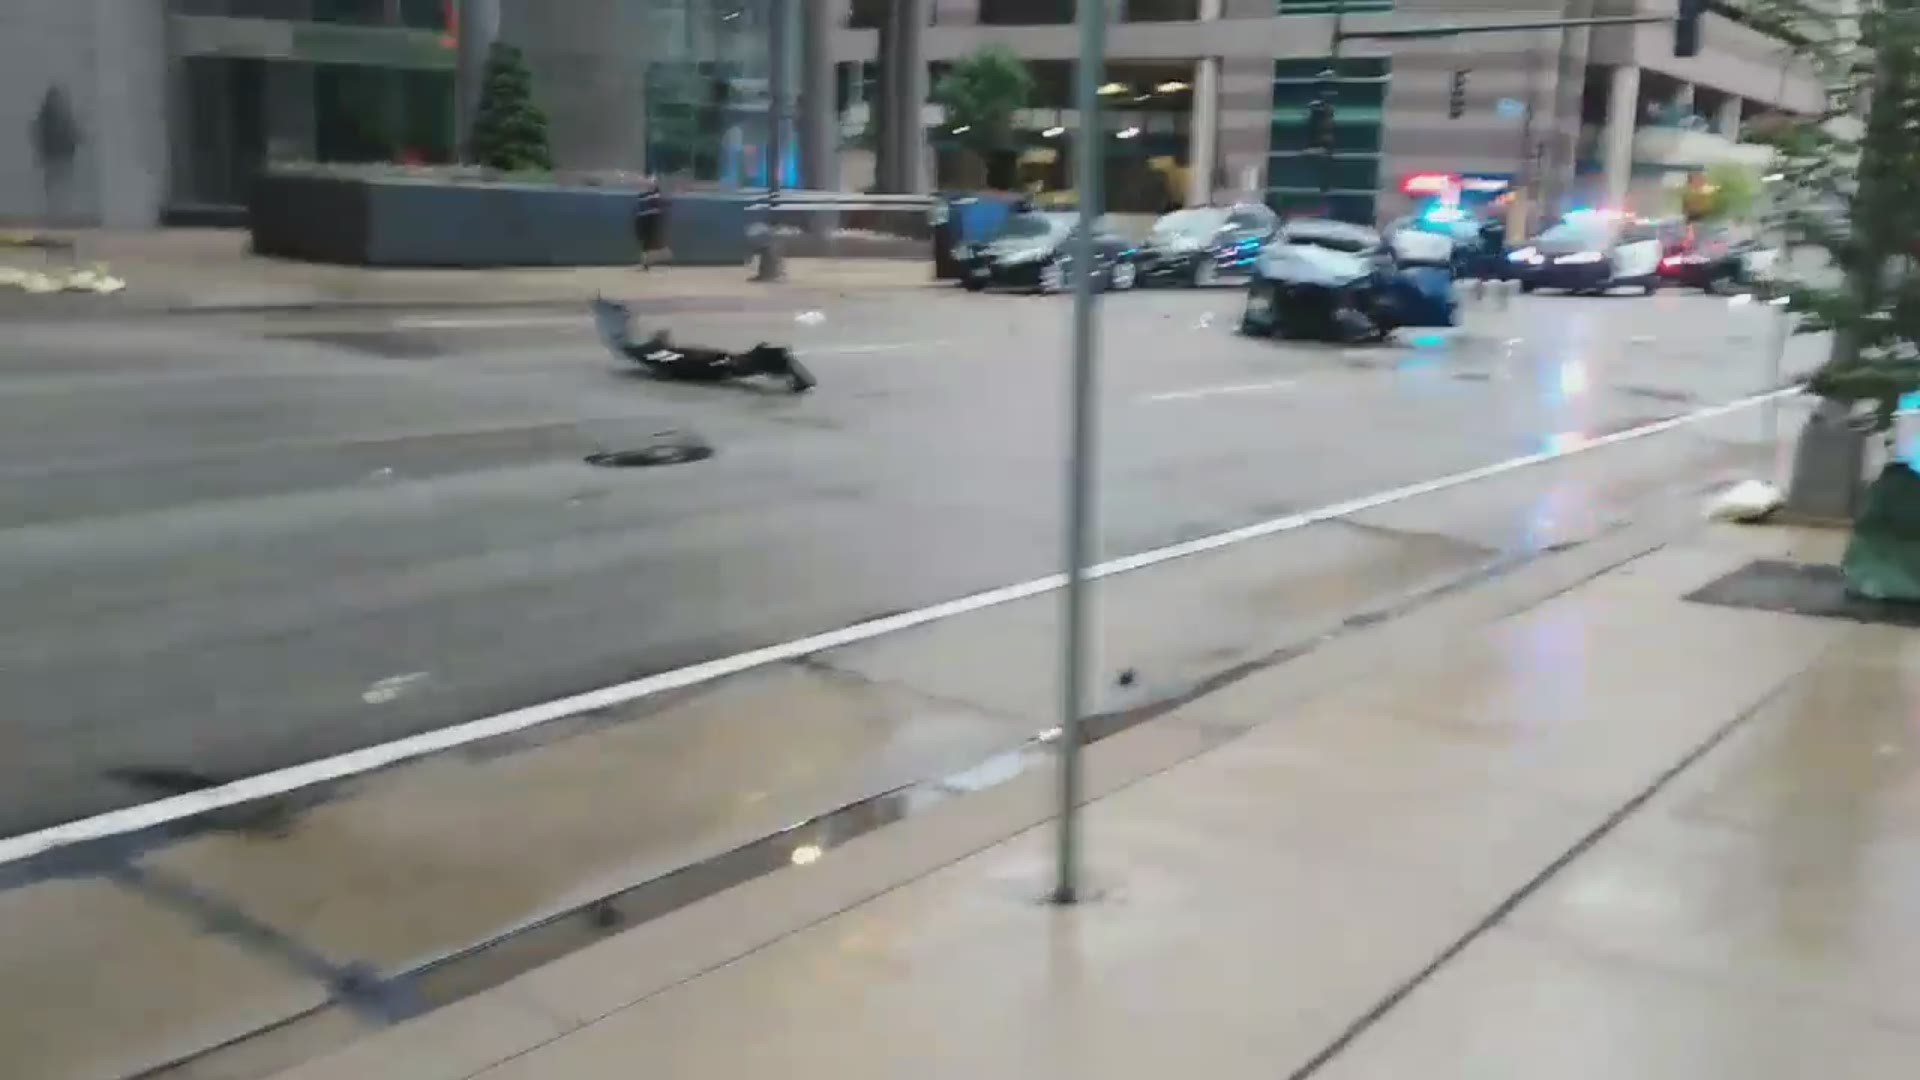 Viewer Derek OMalley captured this footage of a crash aftermath in Downtown Minneapolis.